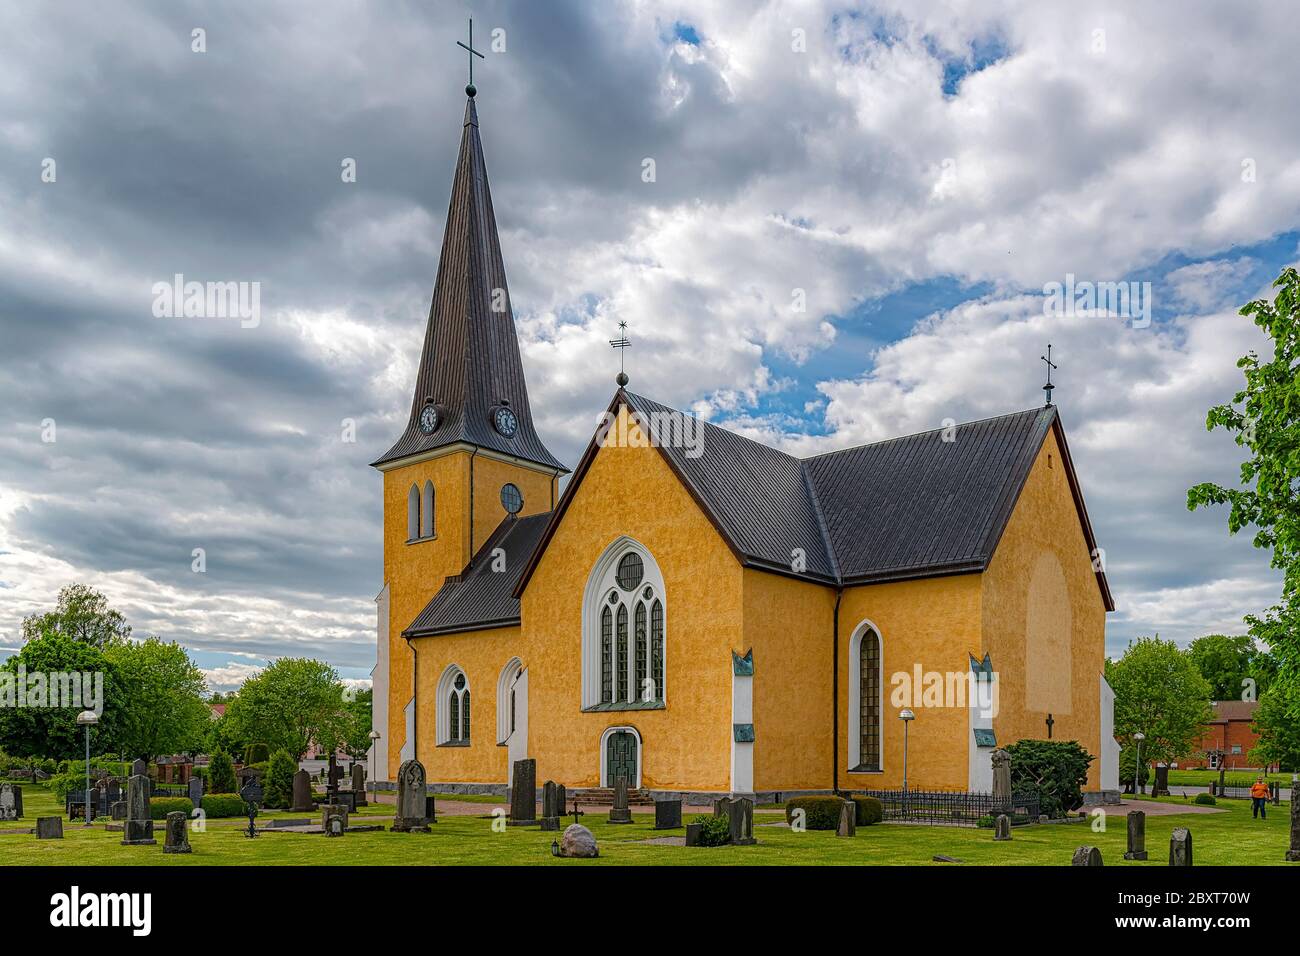 The Broby Church was built in the gothic revival style of architecture.. Stock Photo